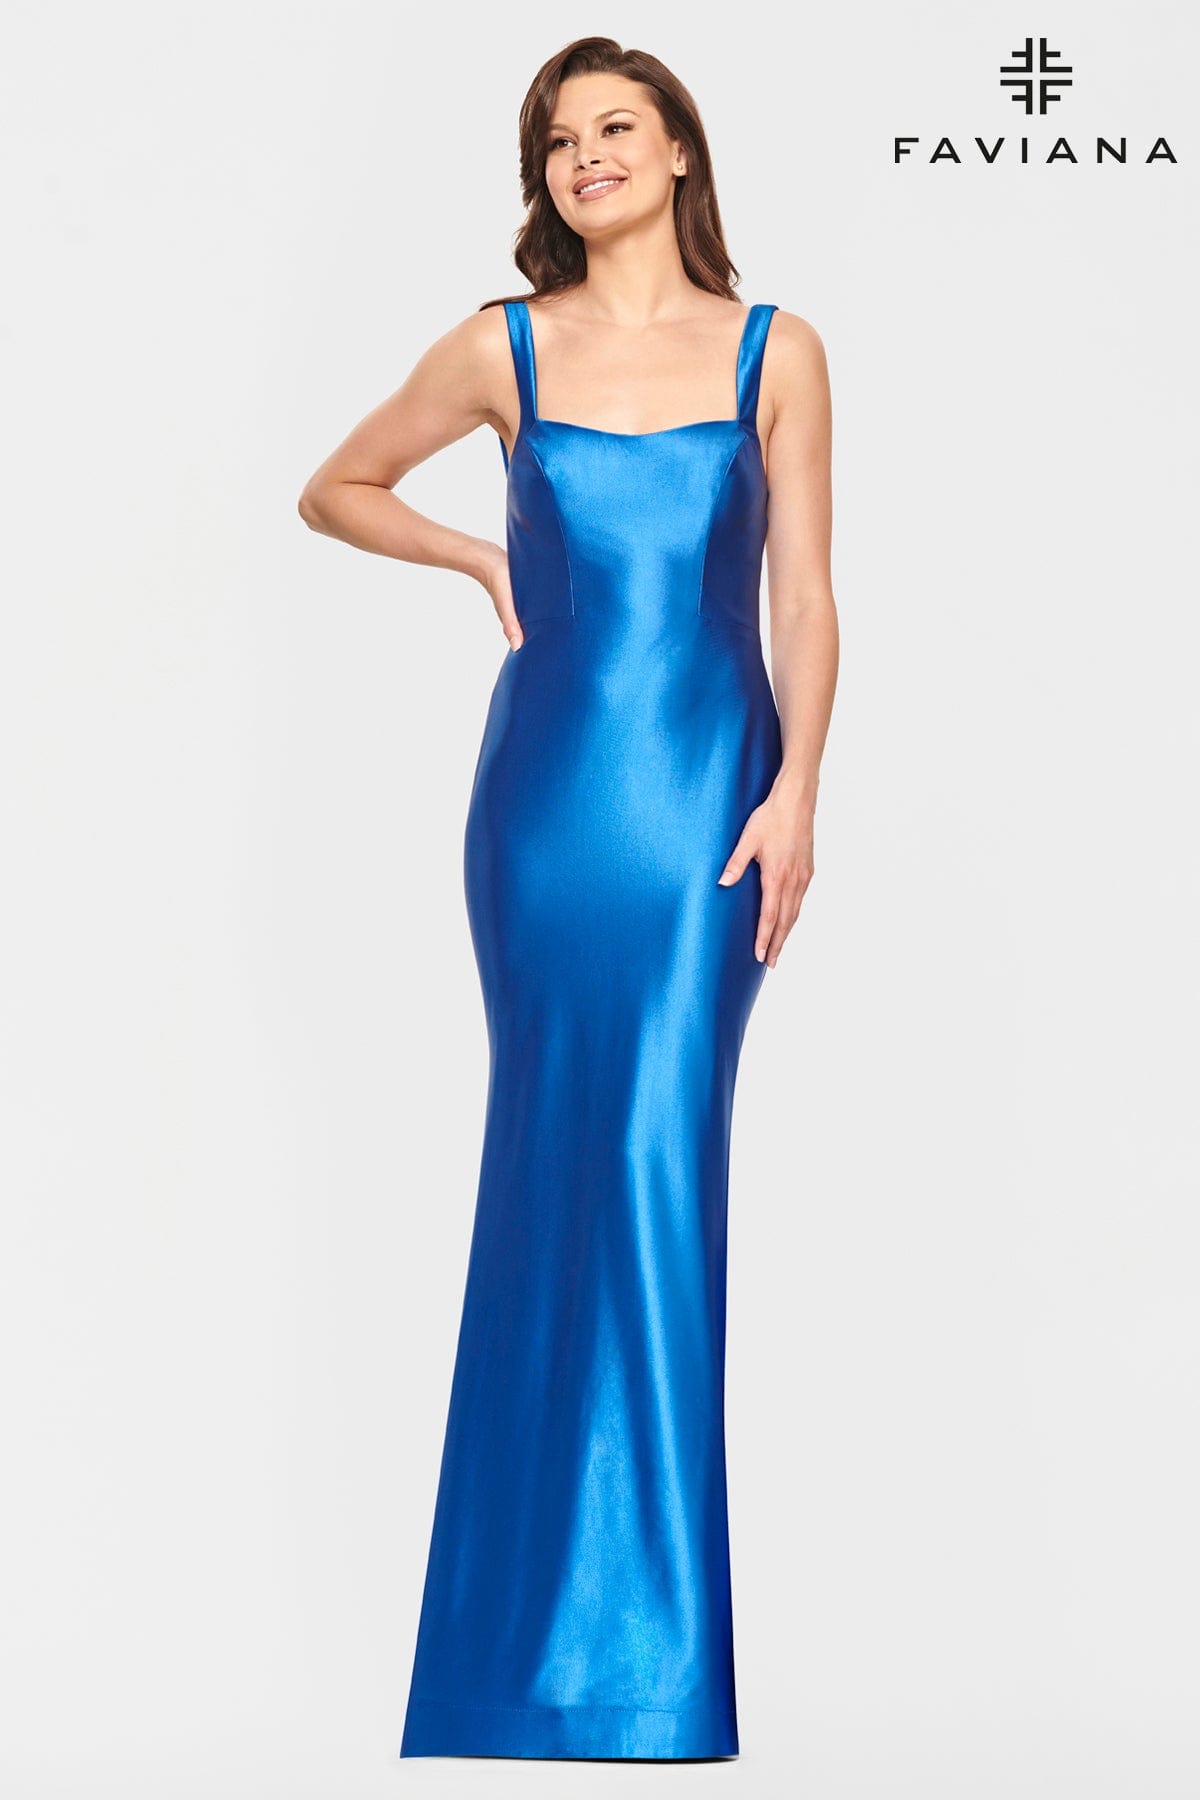 Satin Scoop Neck Dress With Strappy Open Back Detailing And Fit And Flare Skirt